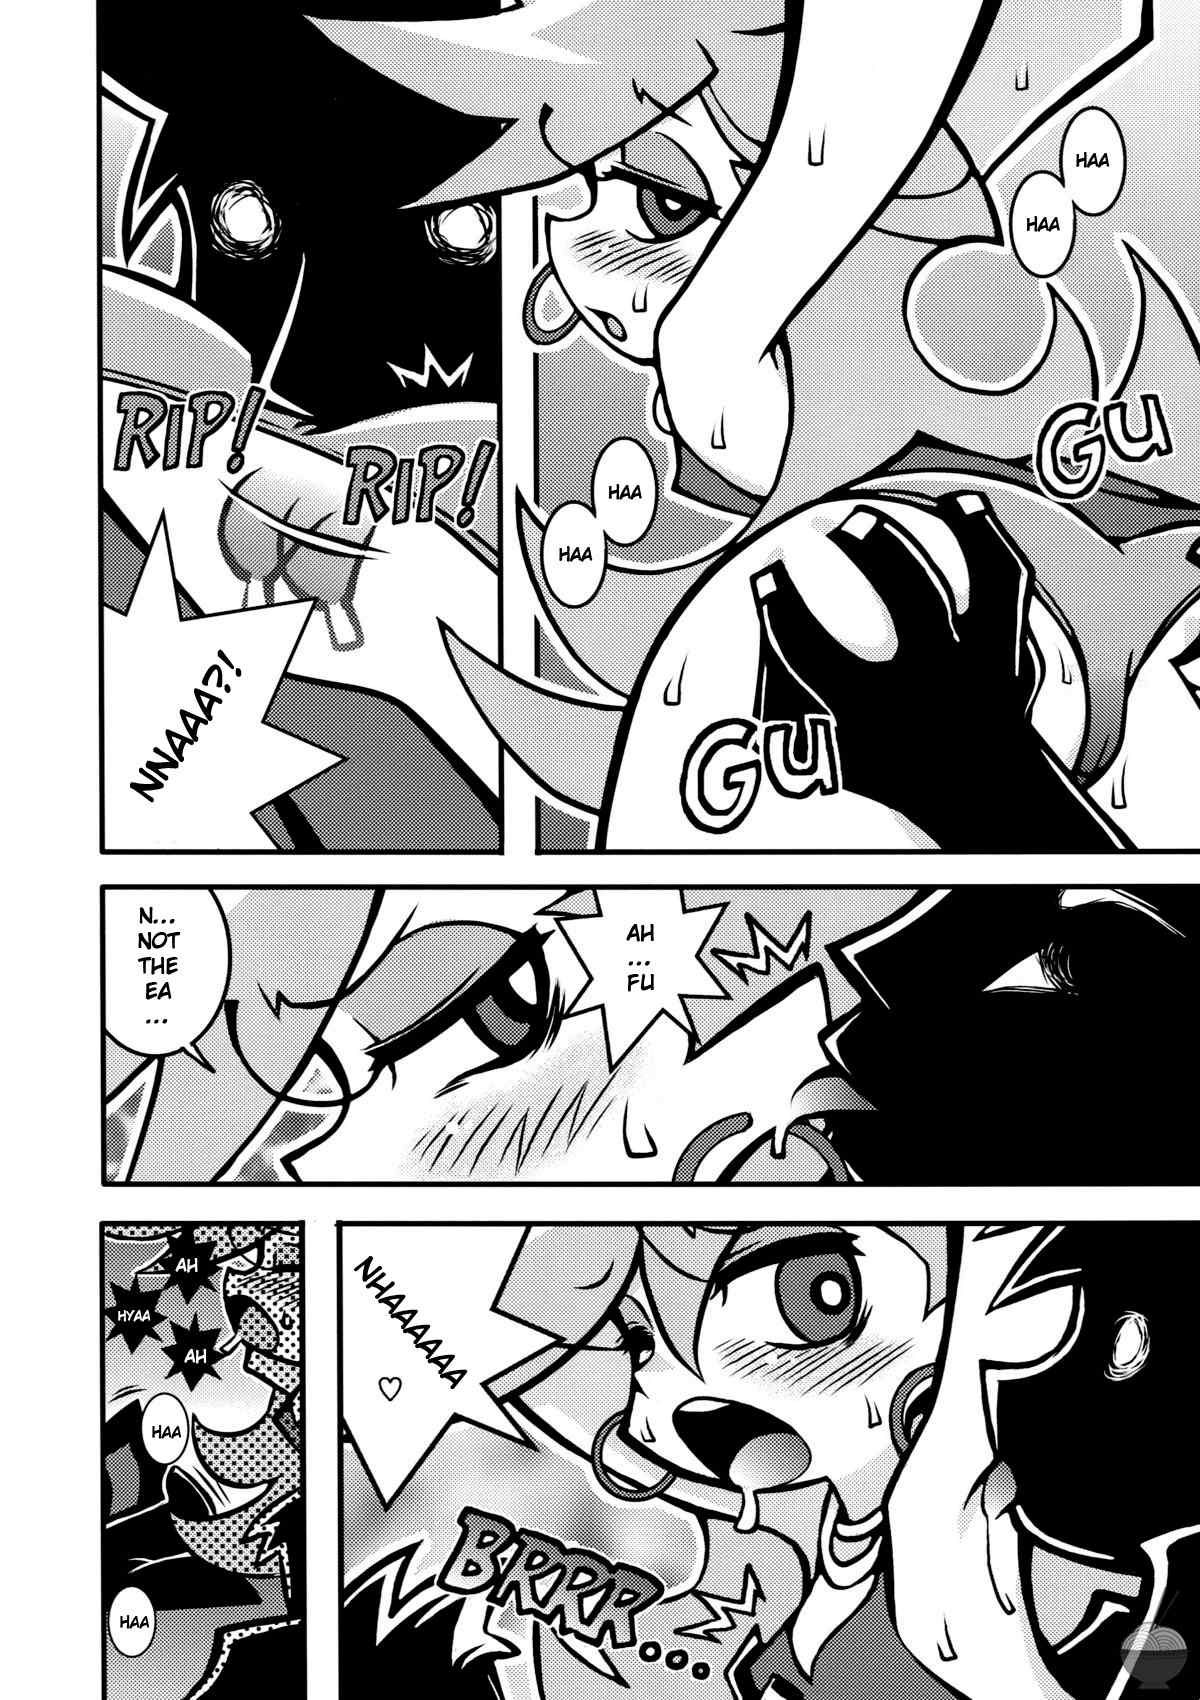 Page 6 | R18 - Panty And Stocking With Garterbelt Hentai Doujinshi by 1787  - Pururin, Free Online Hentai Manga and Doujinshi Reader